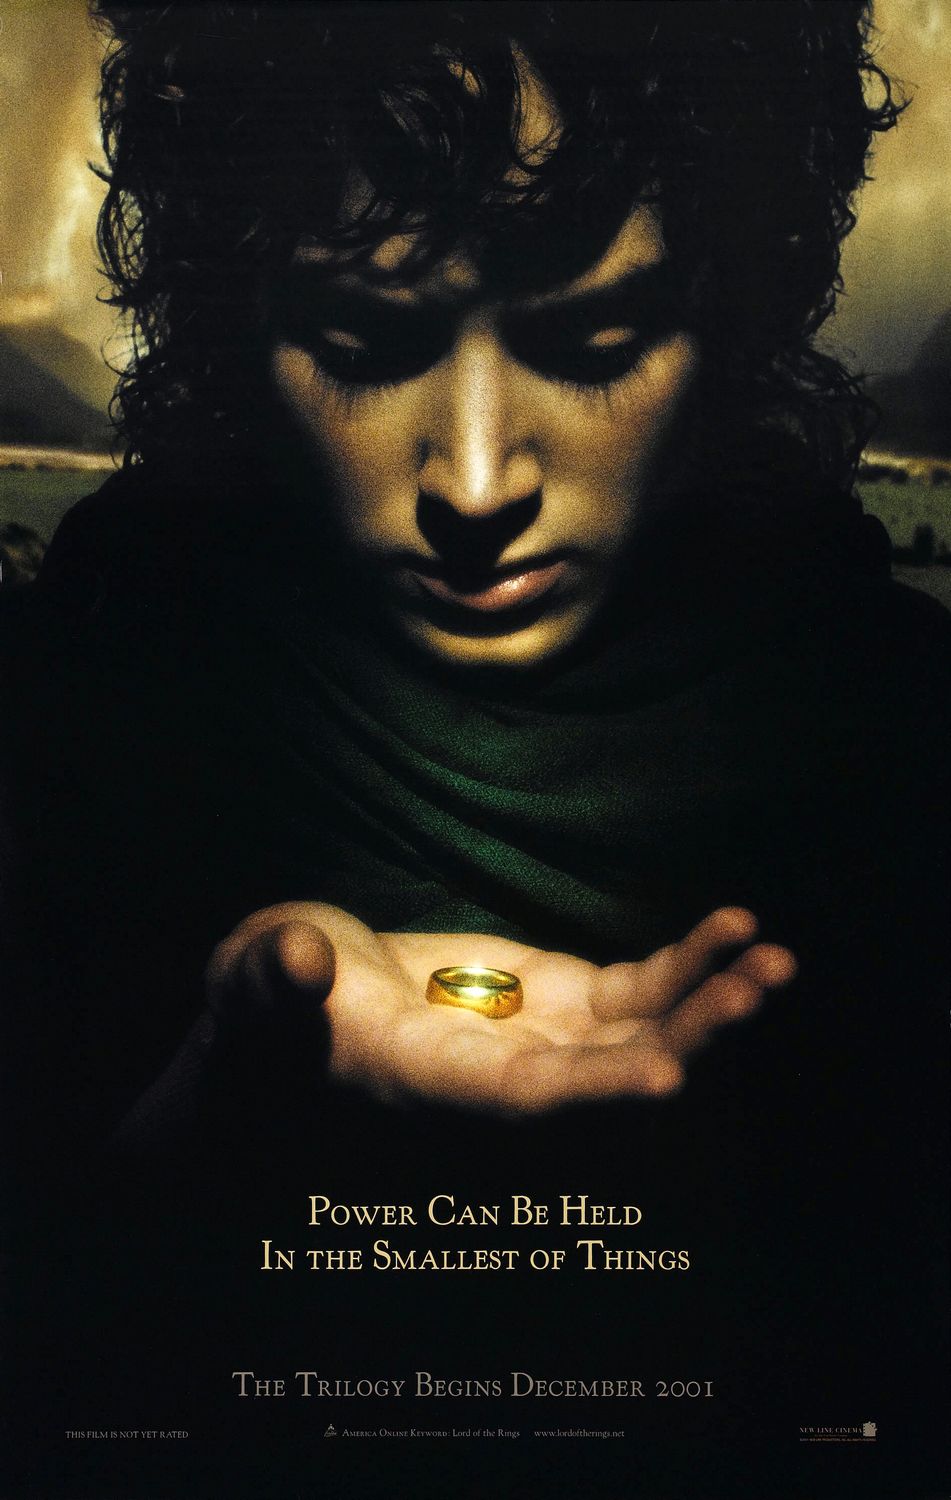 The Lord of the Rings: The Fellowship of the Ring - Movies on